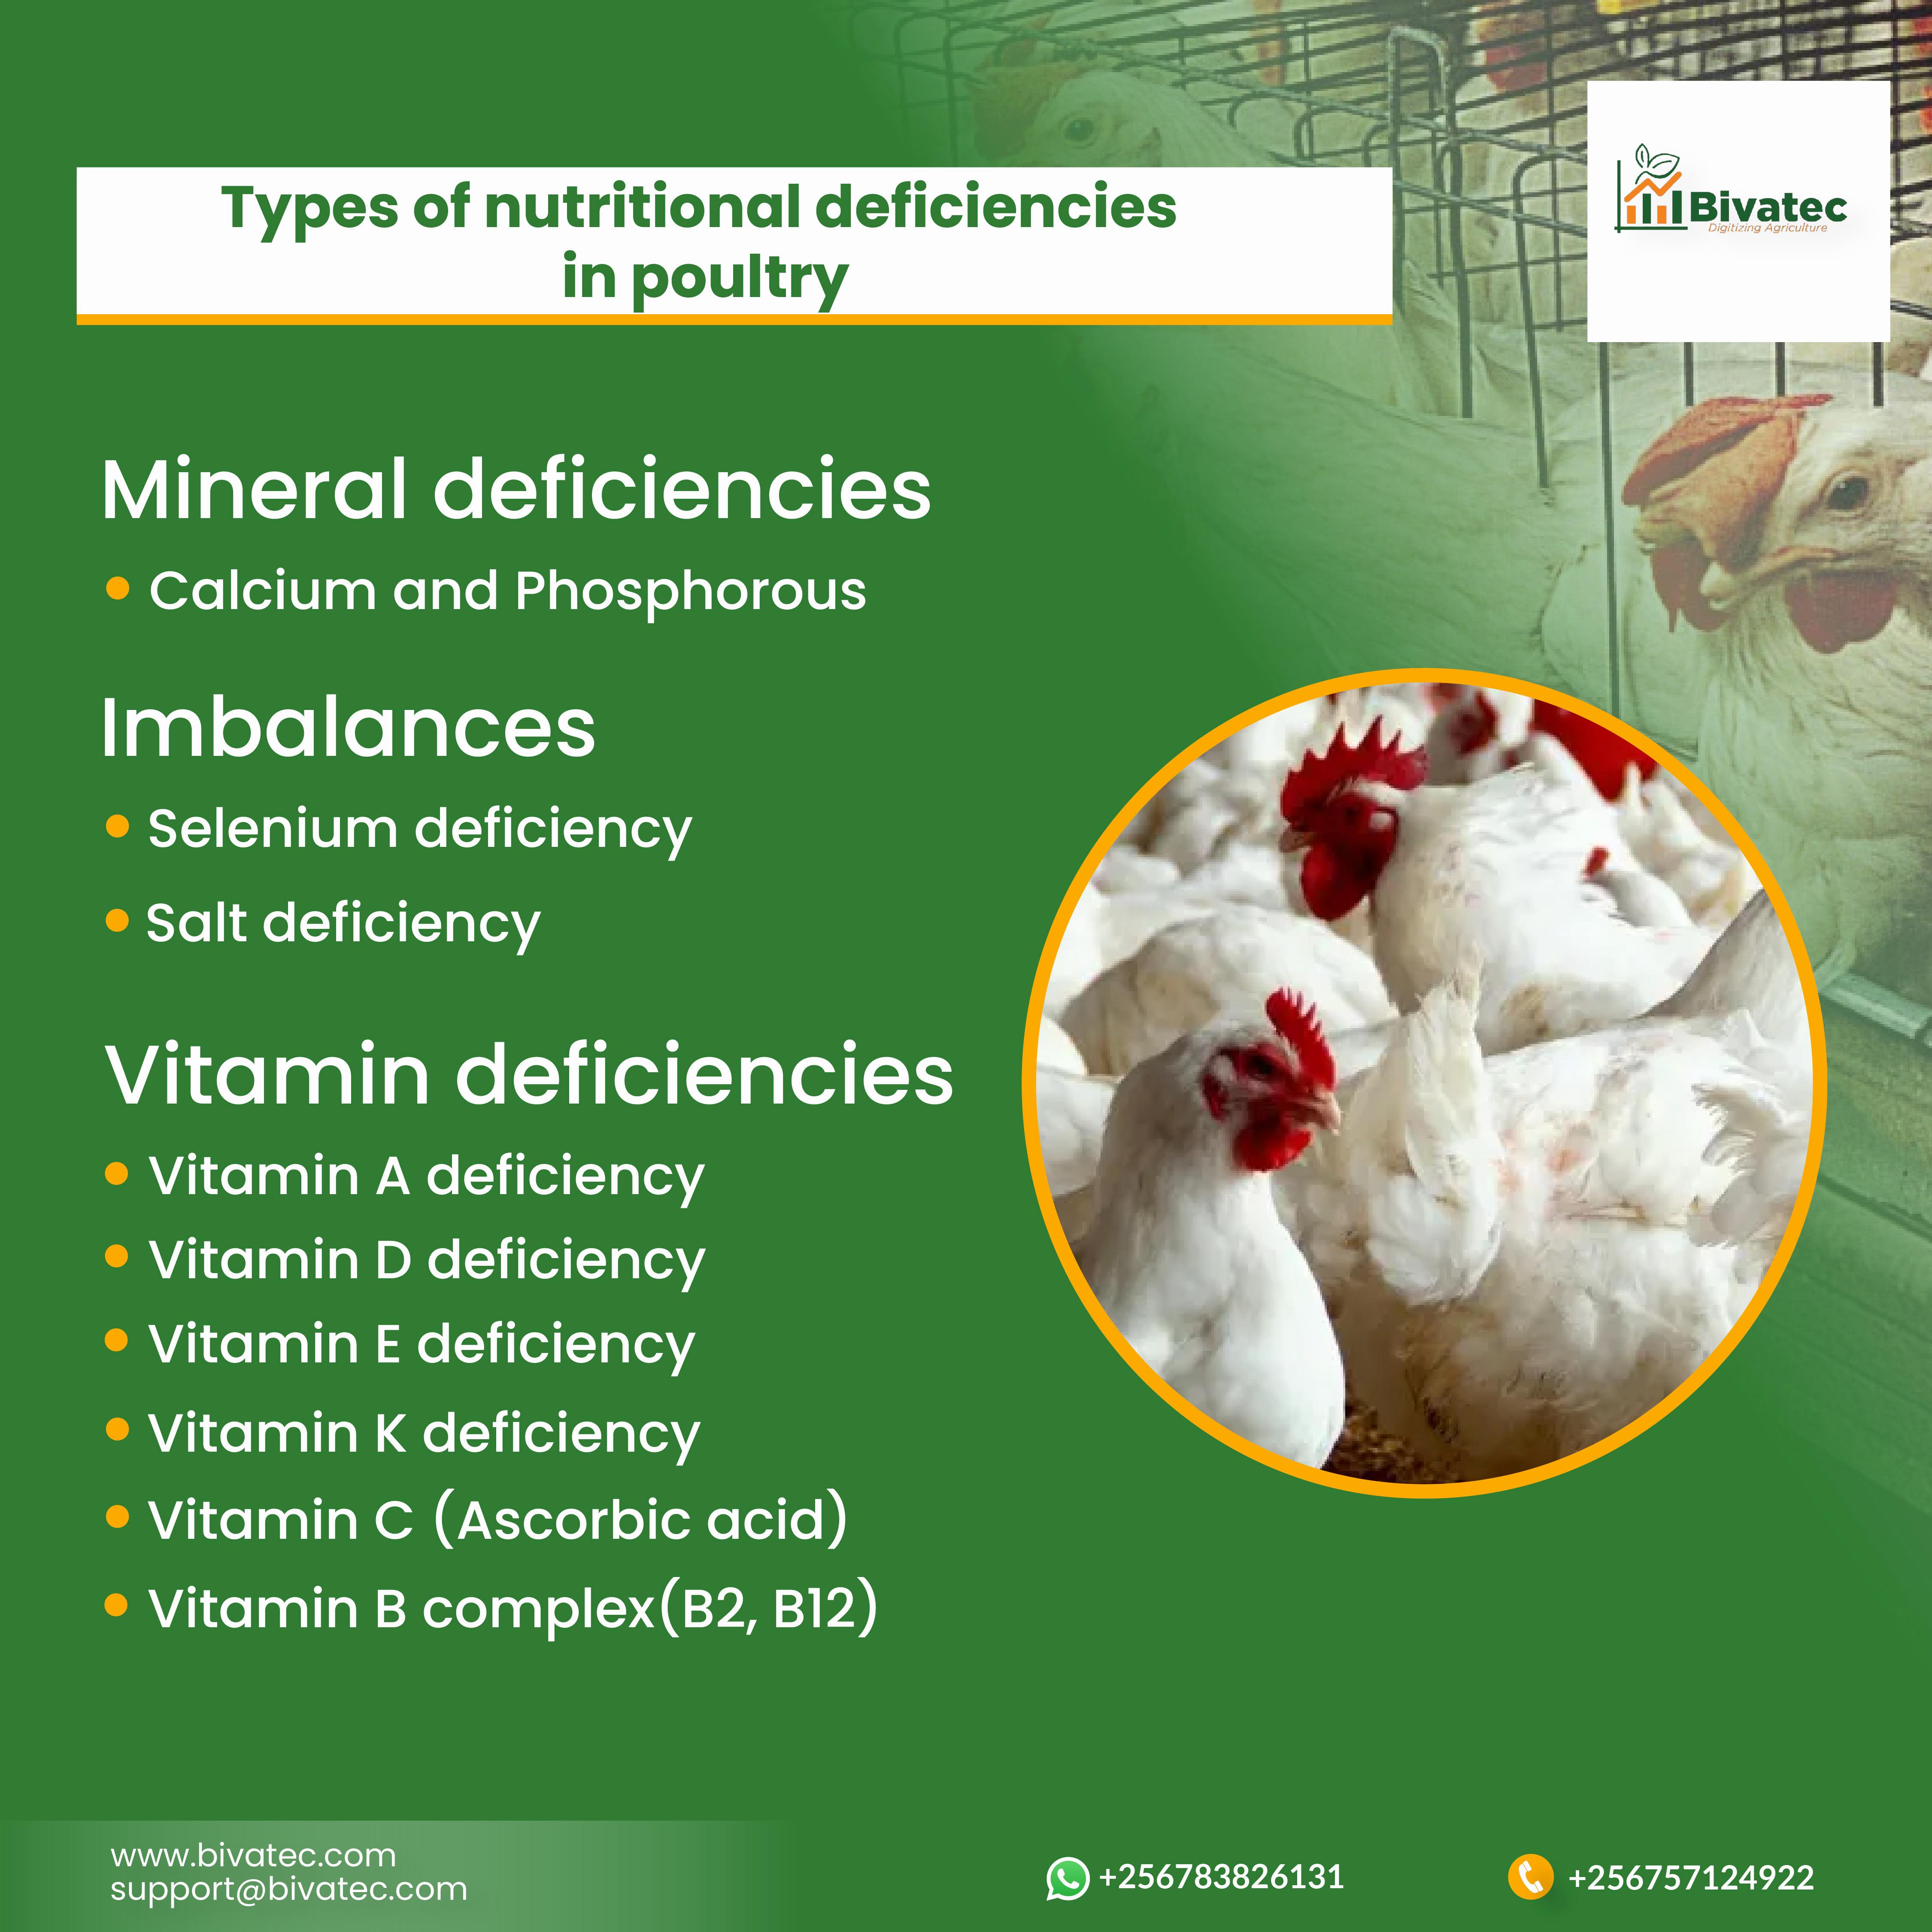 A table that lists the different types of nutritional deficiencies in poultry, which are mineral deficiencies, imbalances, and vitamin deficiencies.